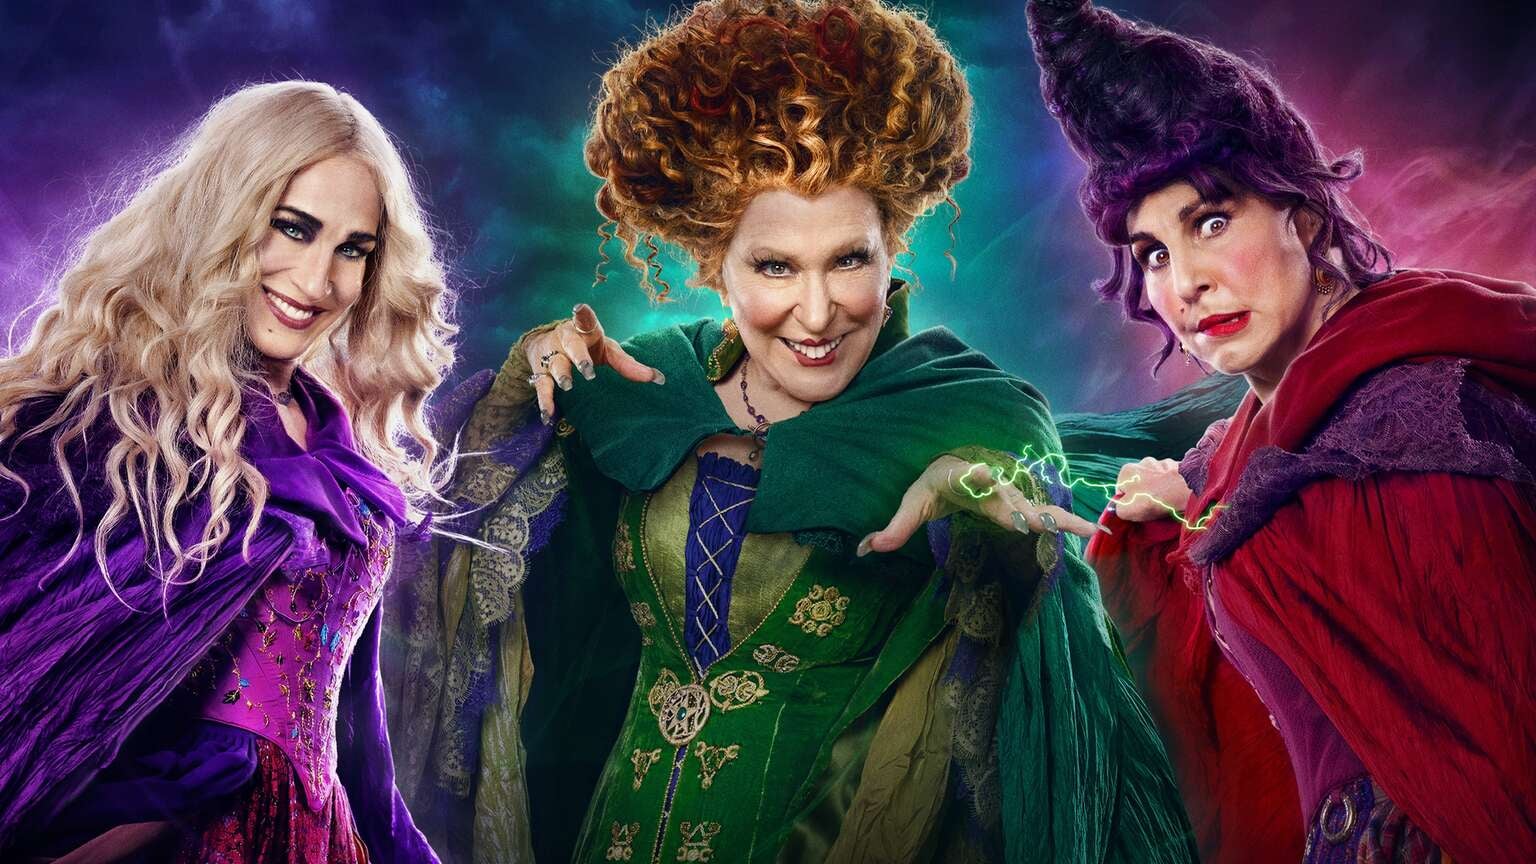 'Hocus Pocus 2' Breaks Disney+ Record to Become Most Watched Film Premiere in Service's History